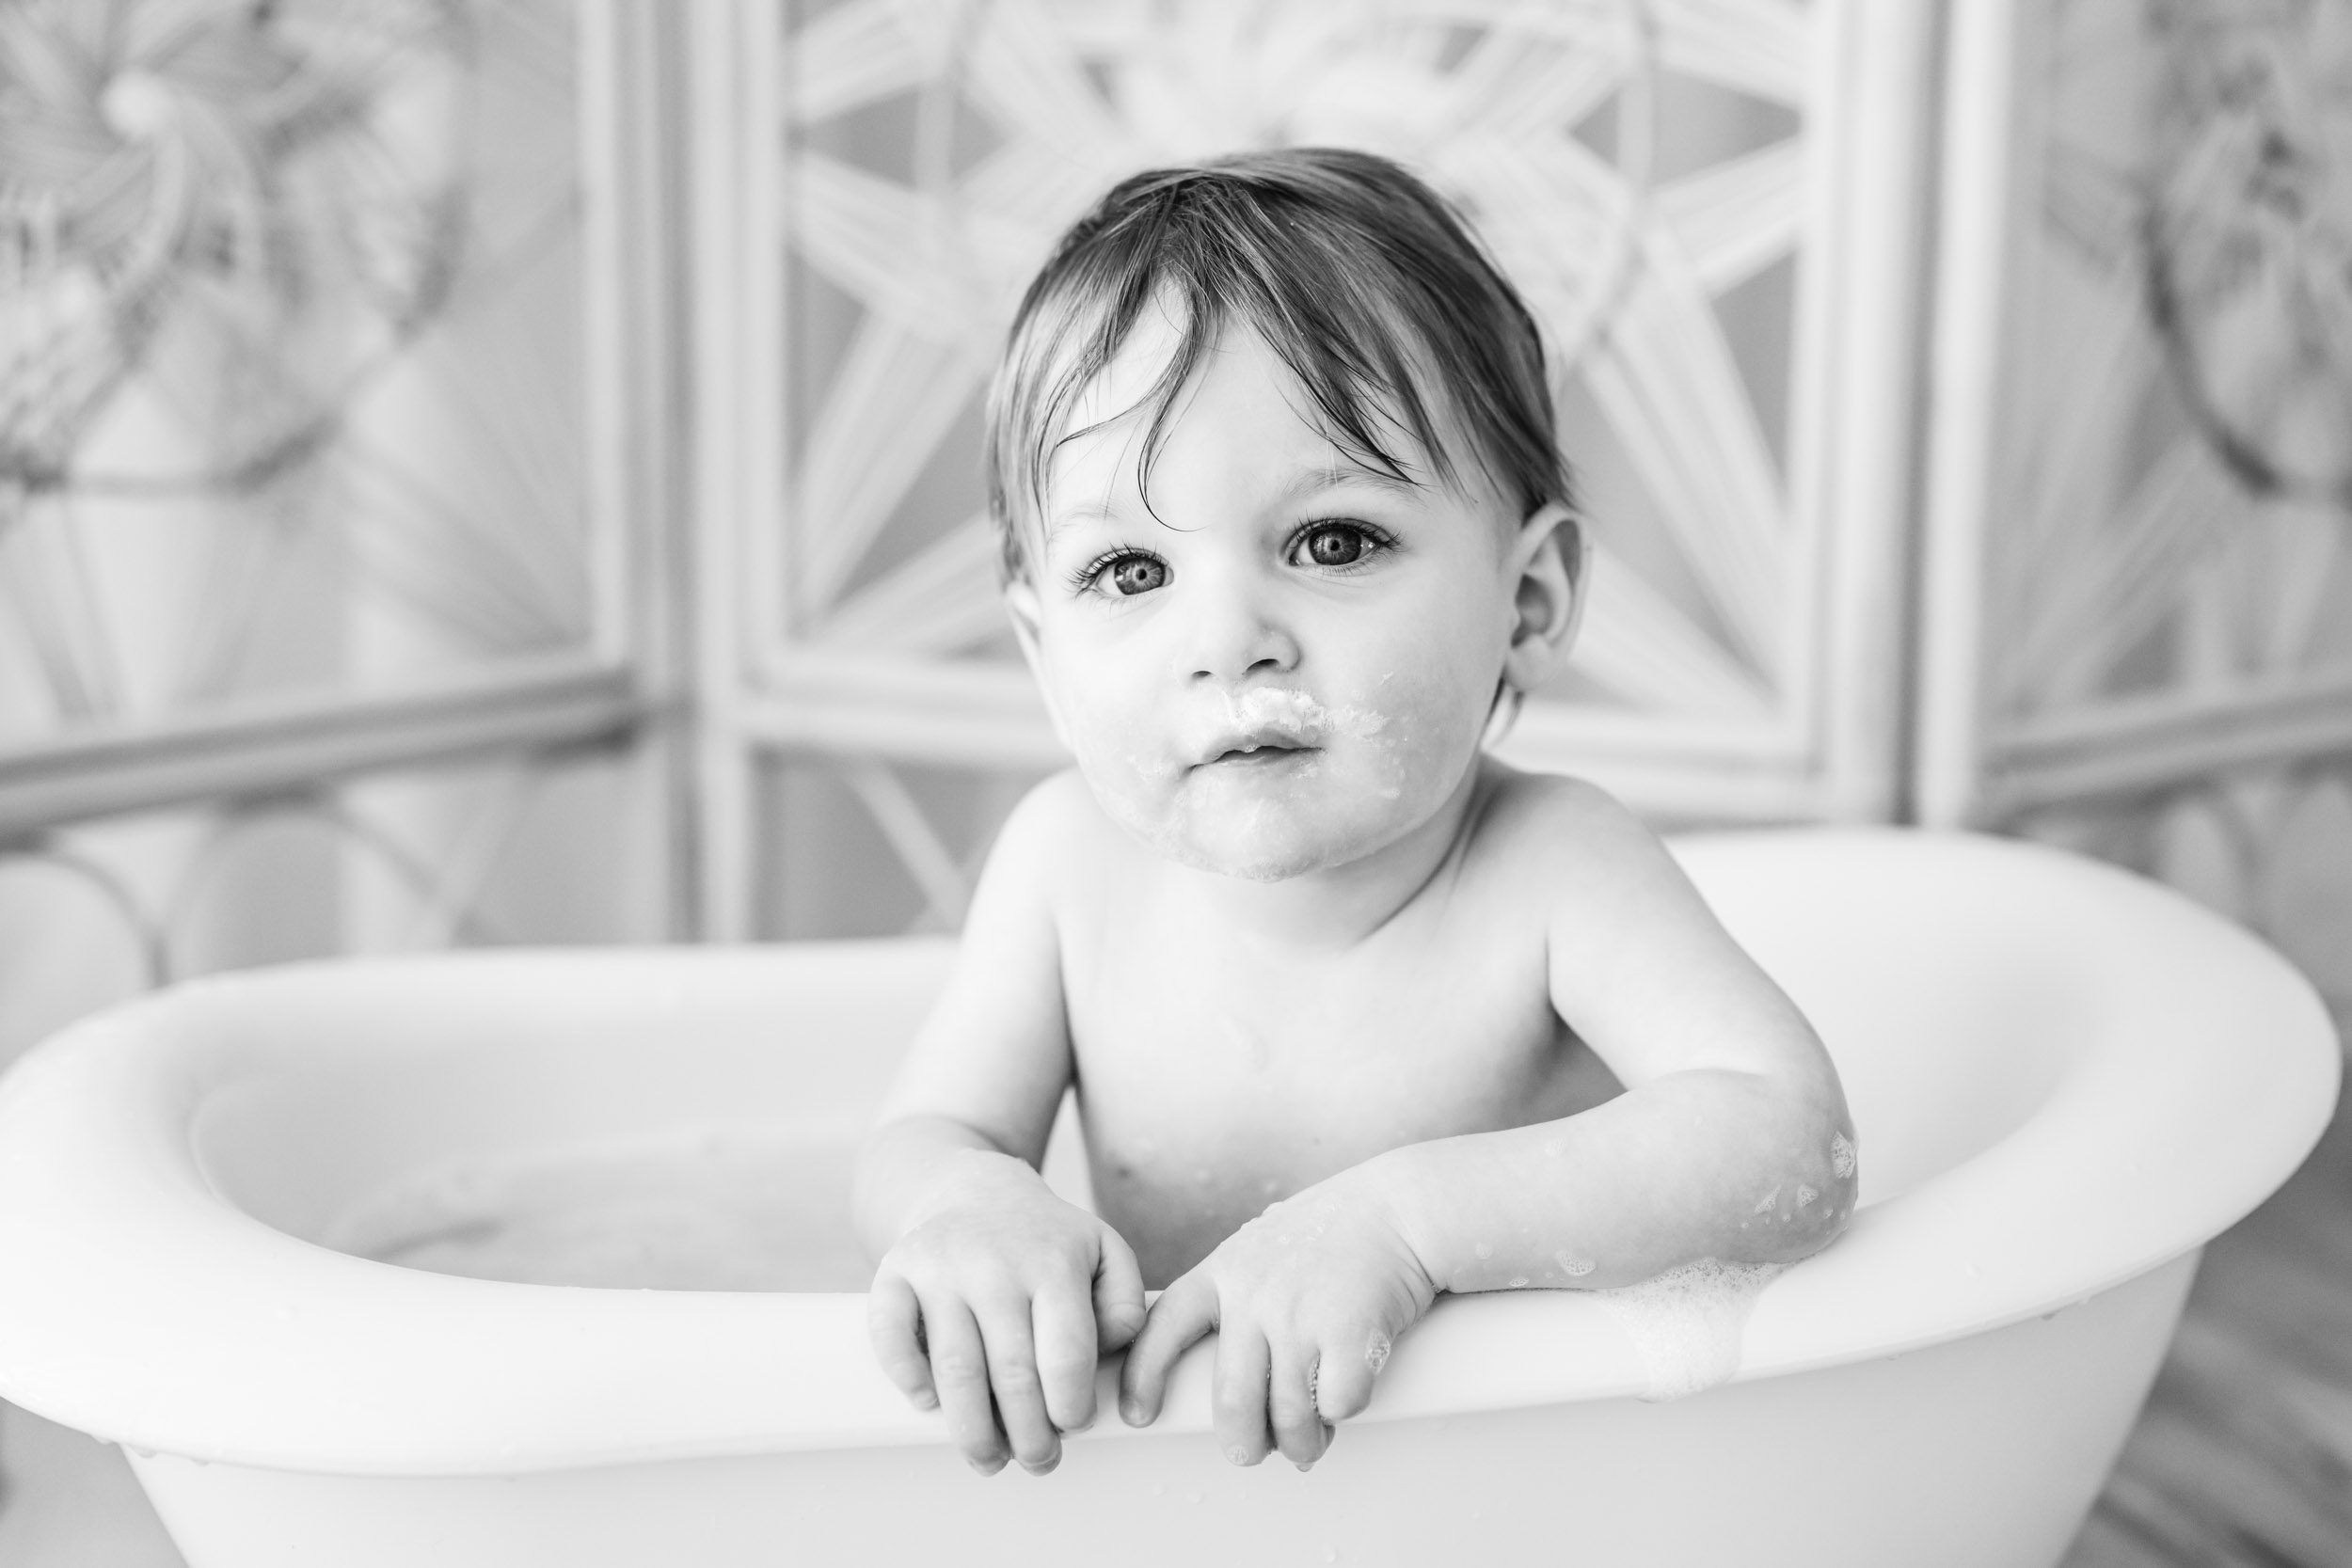 a black and white picture of a young boy sitting in a little white bath tub as he leans on the side of the tub and gazes directly into the camera a young boy splashing in a little bathtub and looking right at the camera with a huge smile on his face during a 1st birthday cake smash & splash photoshoot